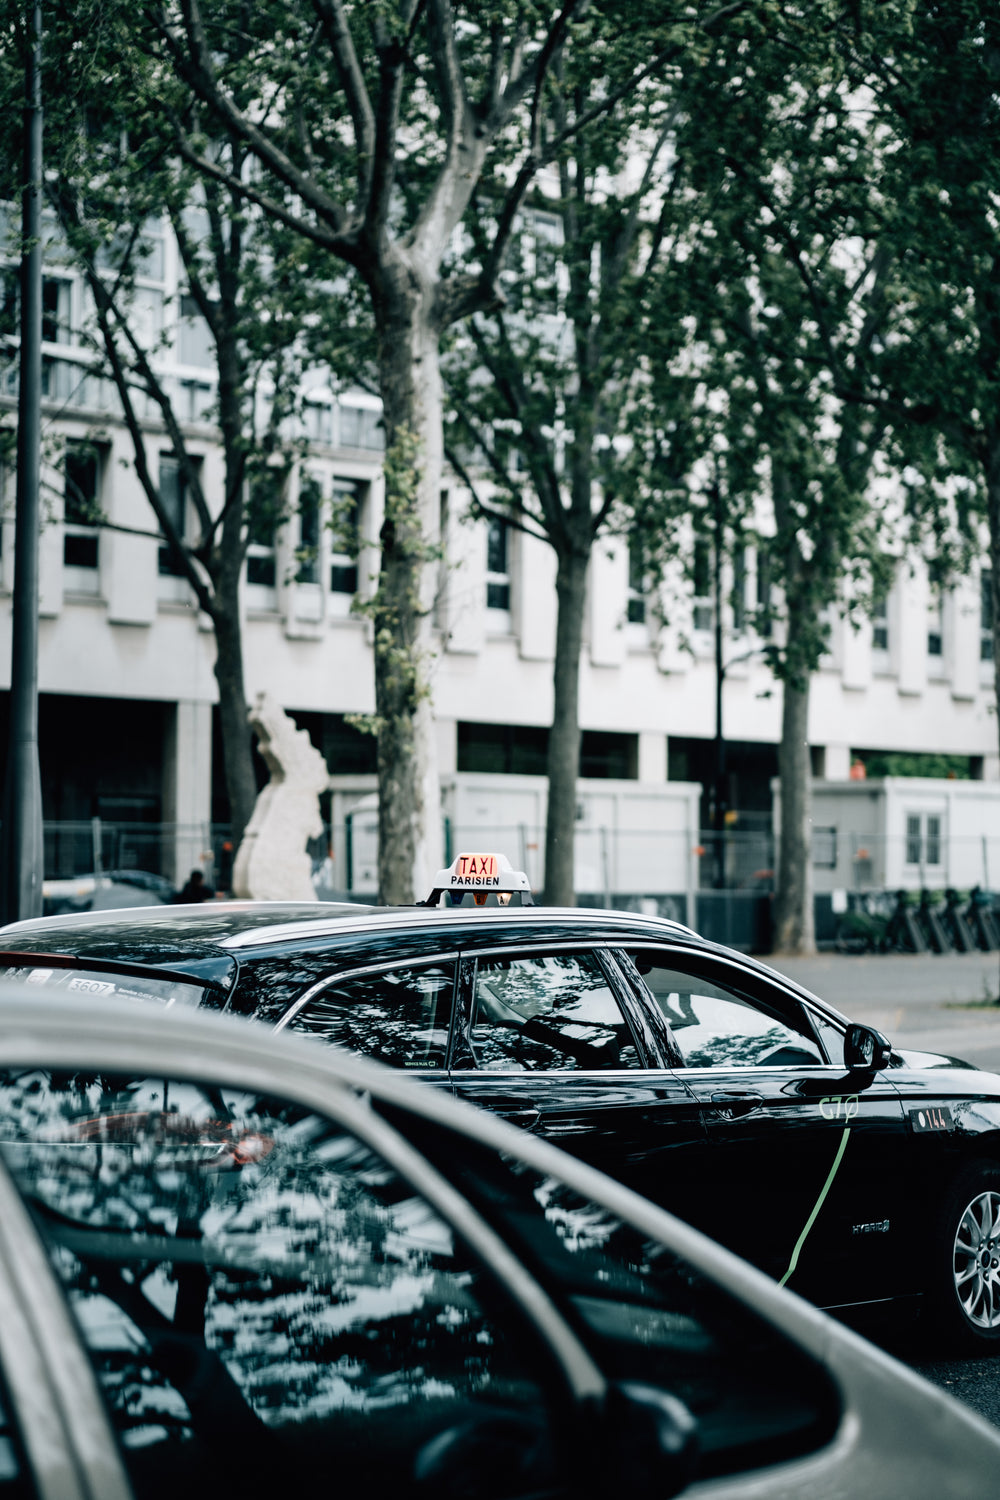 black car with a taxi sign on its roof